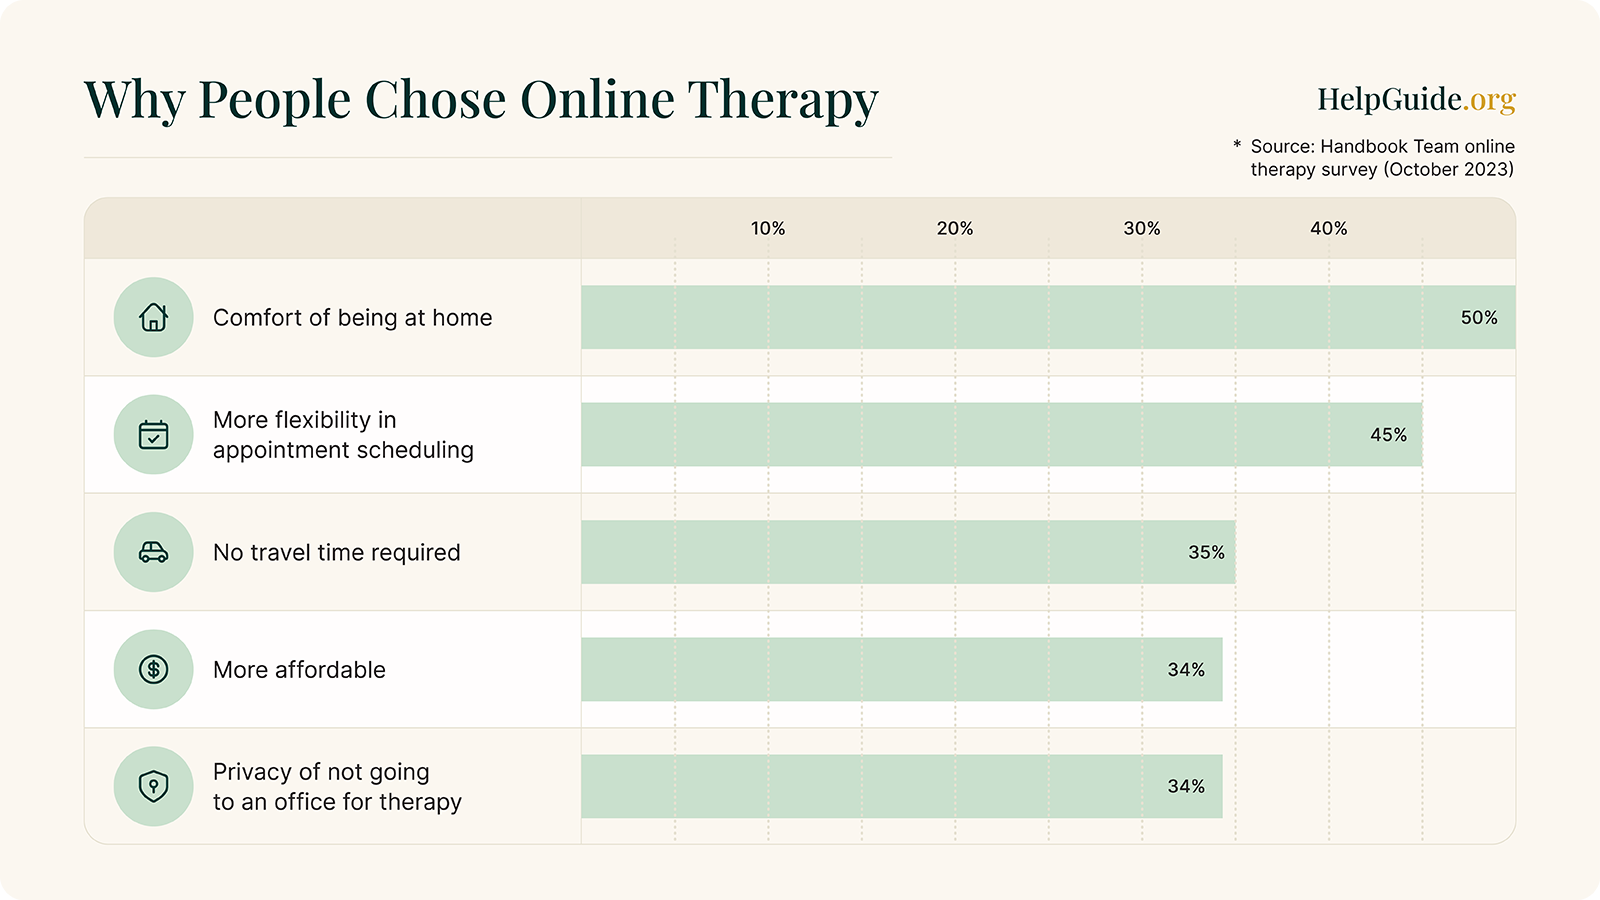 why people chose online therapy according to Handbook Team October 2023 survey